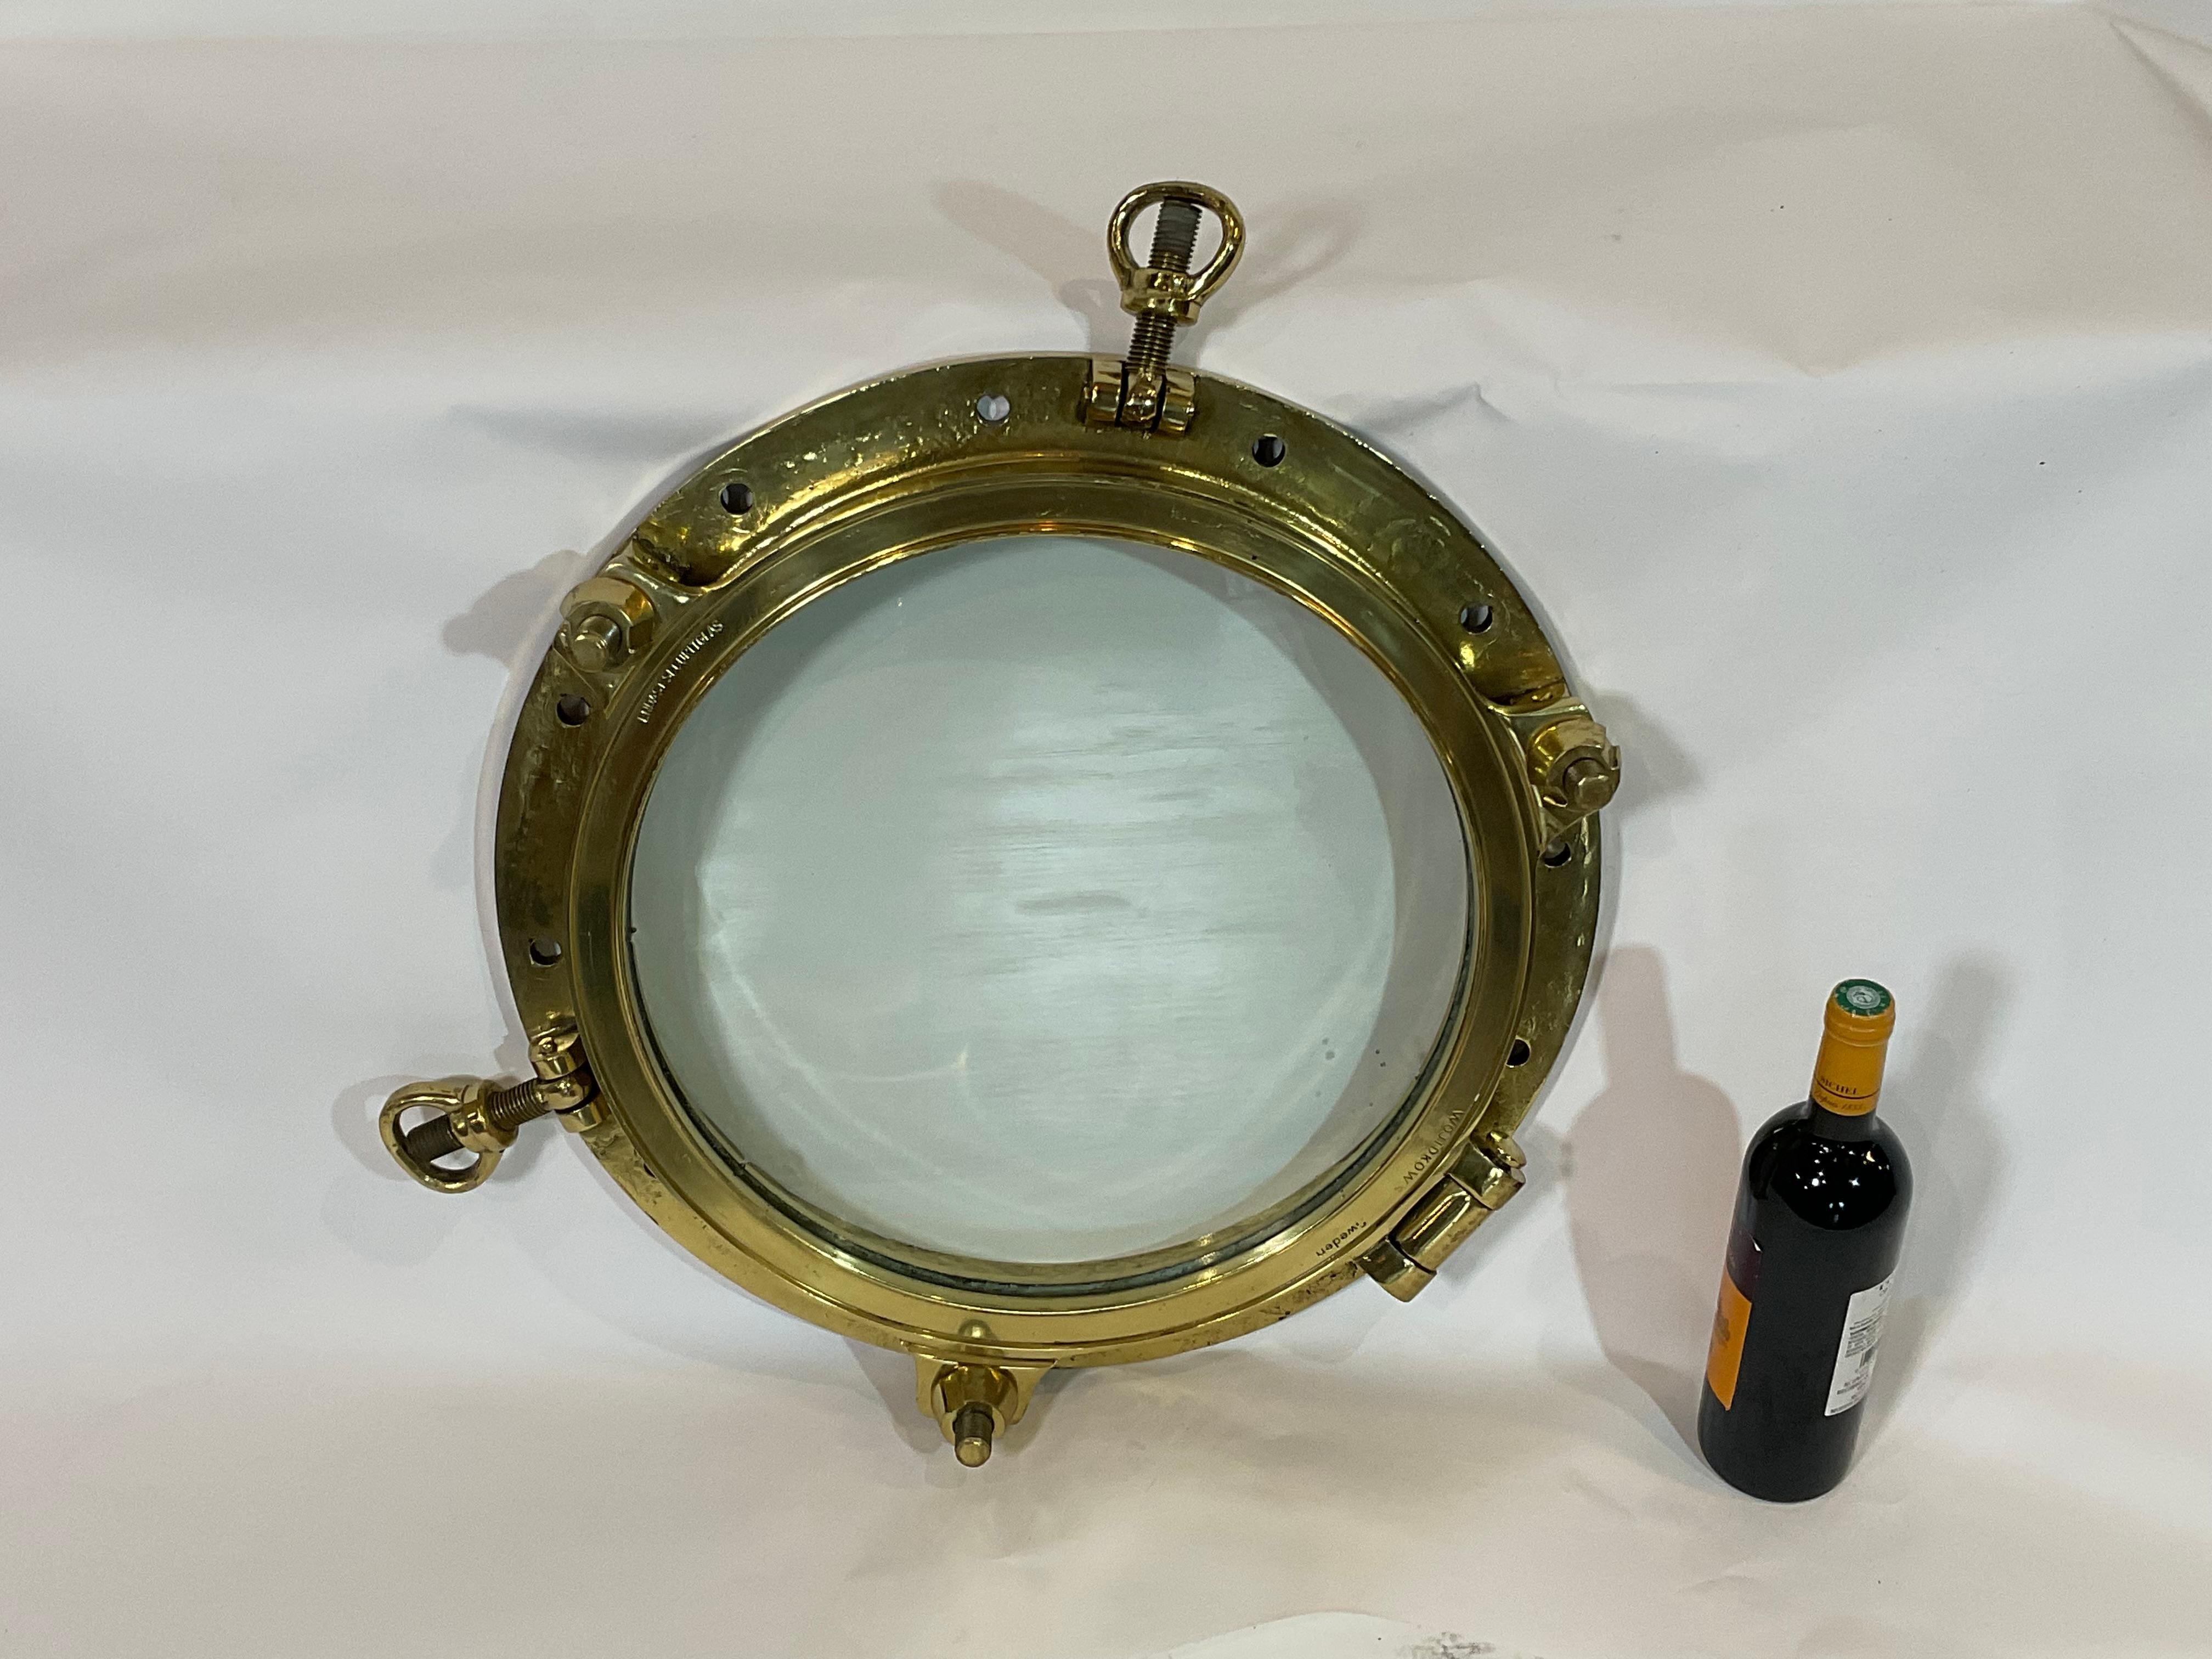 Highly polished ships porthole with clear lacquer finish. Hinged door with five bolts. Ring is engraved Endast Securitglas, Wojidkows, Sweden. Quality piece.

Weight: 51 LBS.
Overall dimensions: 5” height x 21” diameter.
Made: Sweden.
Material: